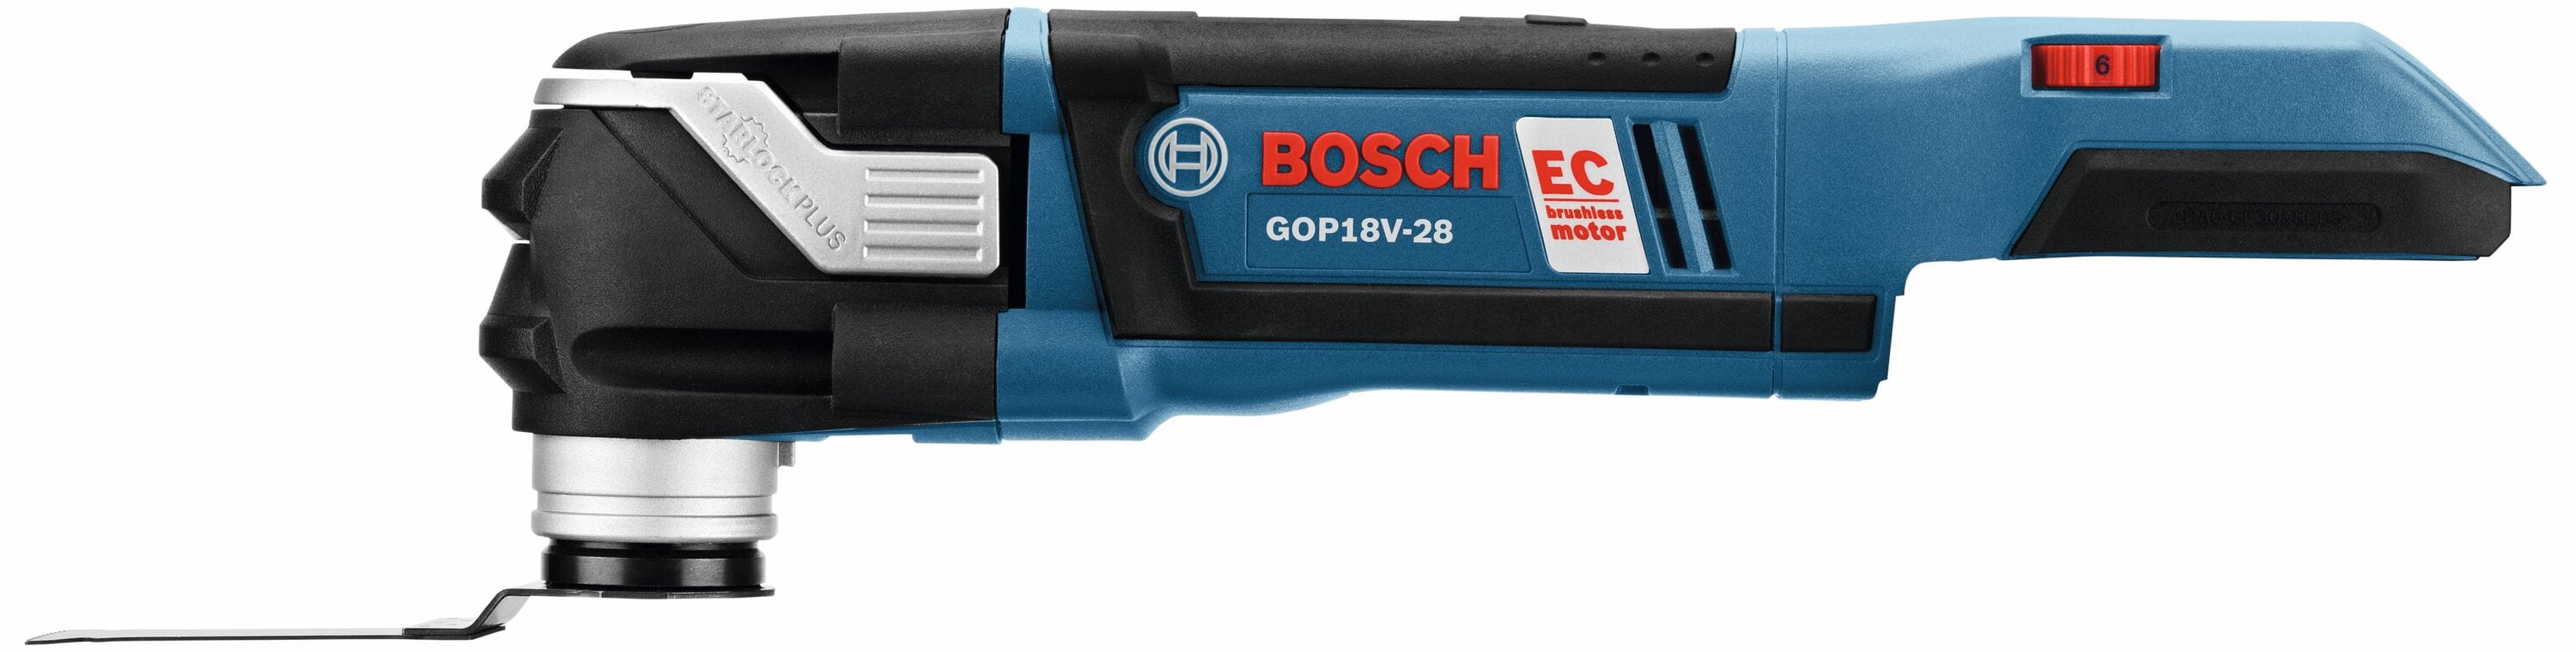 Bosch StarlockPlus Cordless Brushless Tool Variable 18-volt in the Oscillating Oscillating Kits department at Multi-Tool Speed